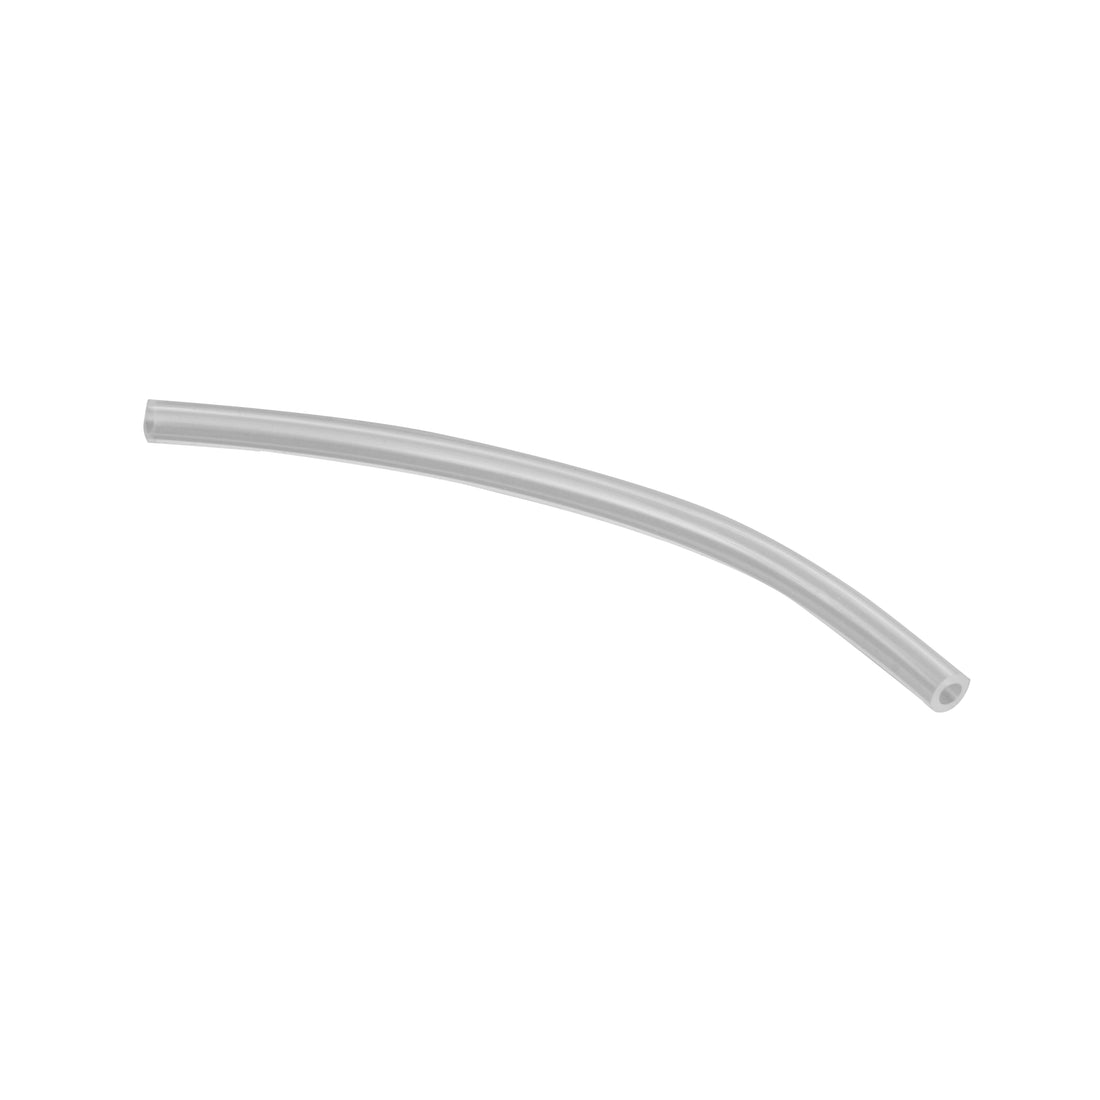 Gaggia Silicone Tubing 3.5x6 (3" in length)